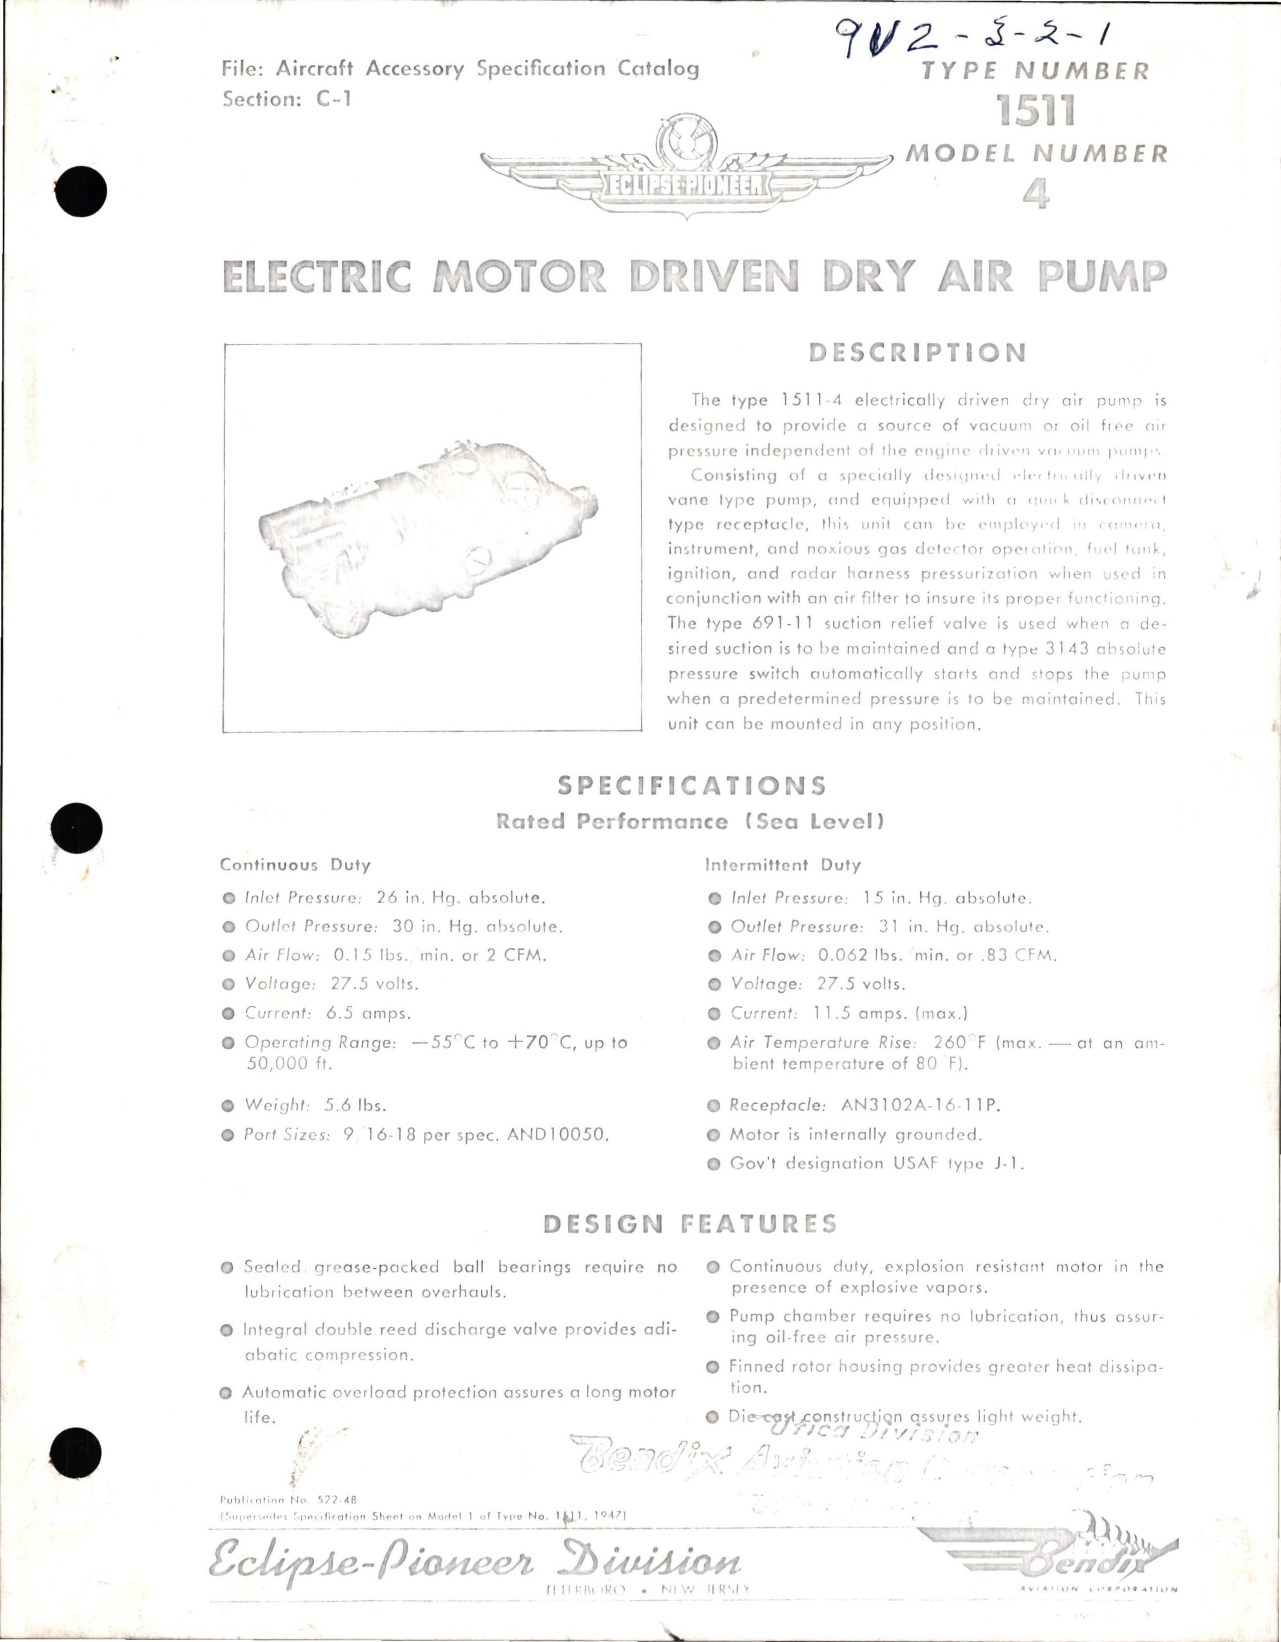 Sample page 1 from AirCorps Library document: Specifications with Parts List for Electric Motor Driven Dry Air Pump - Type 1511 - Model 4